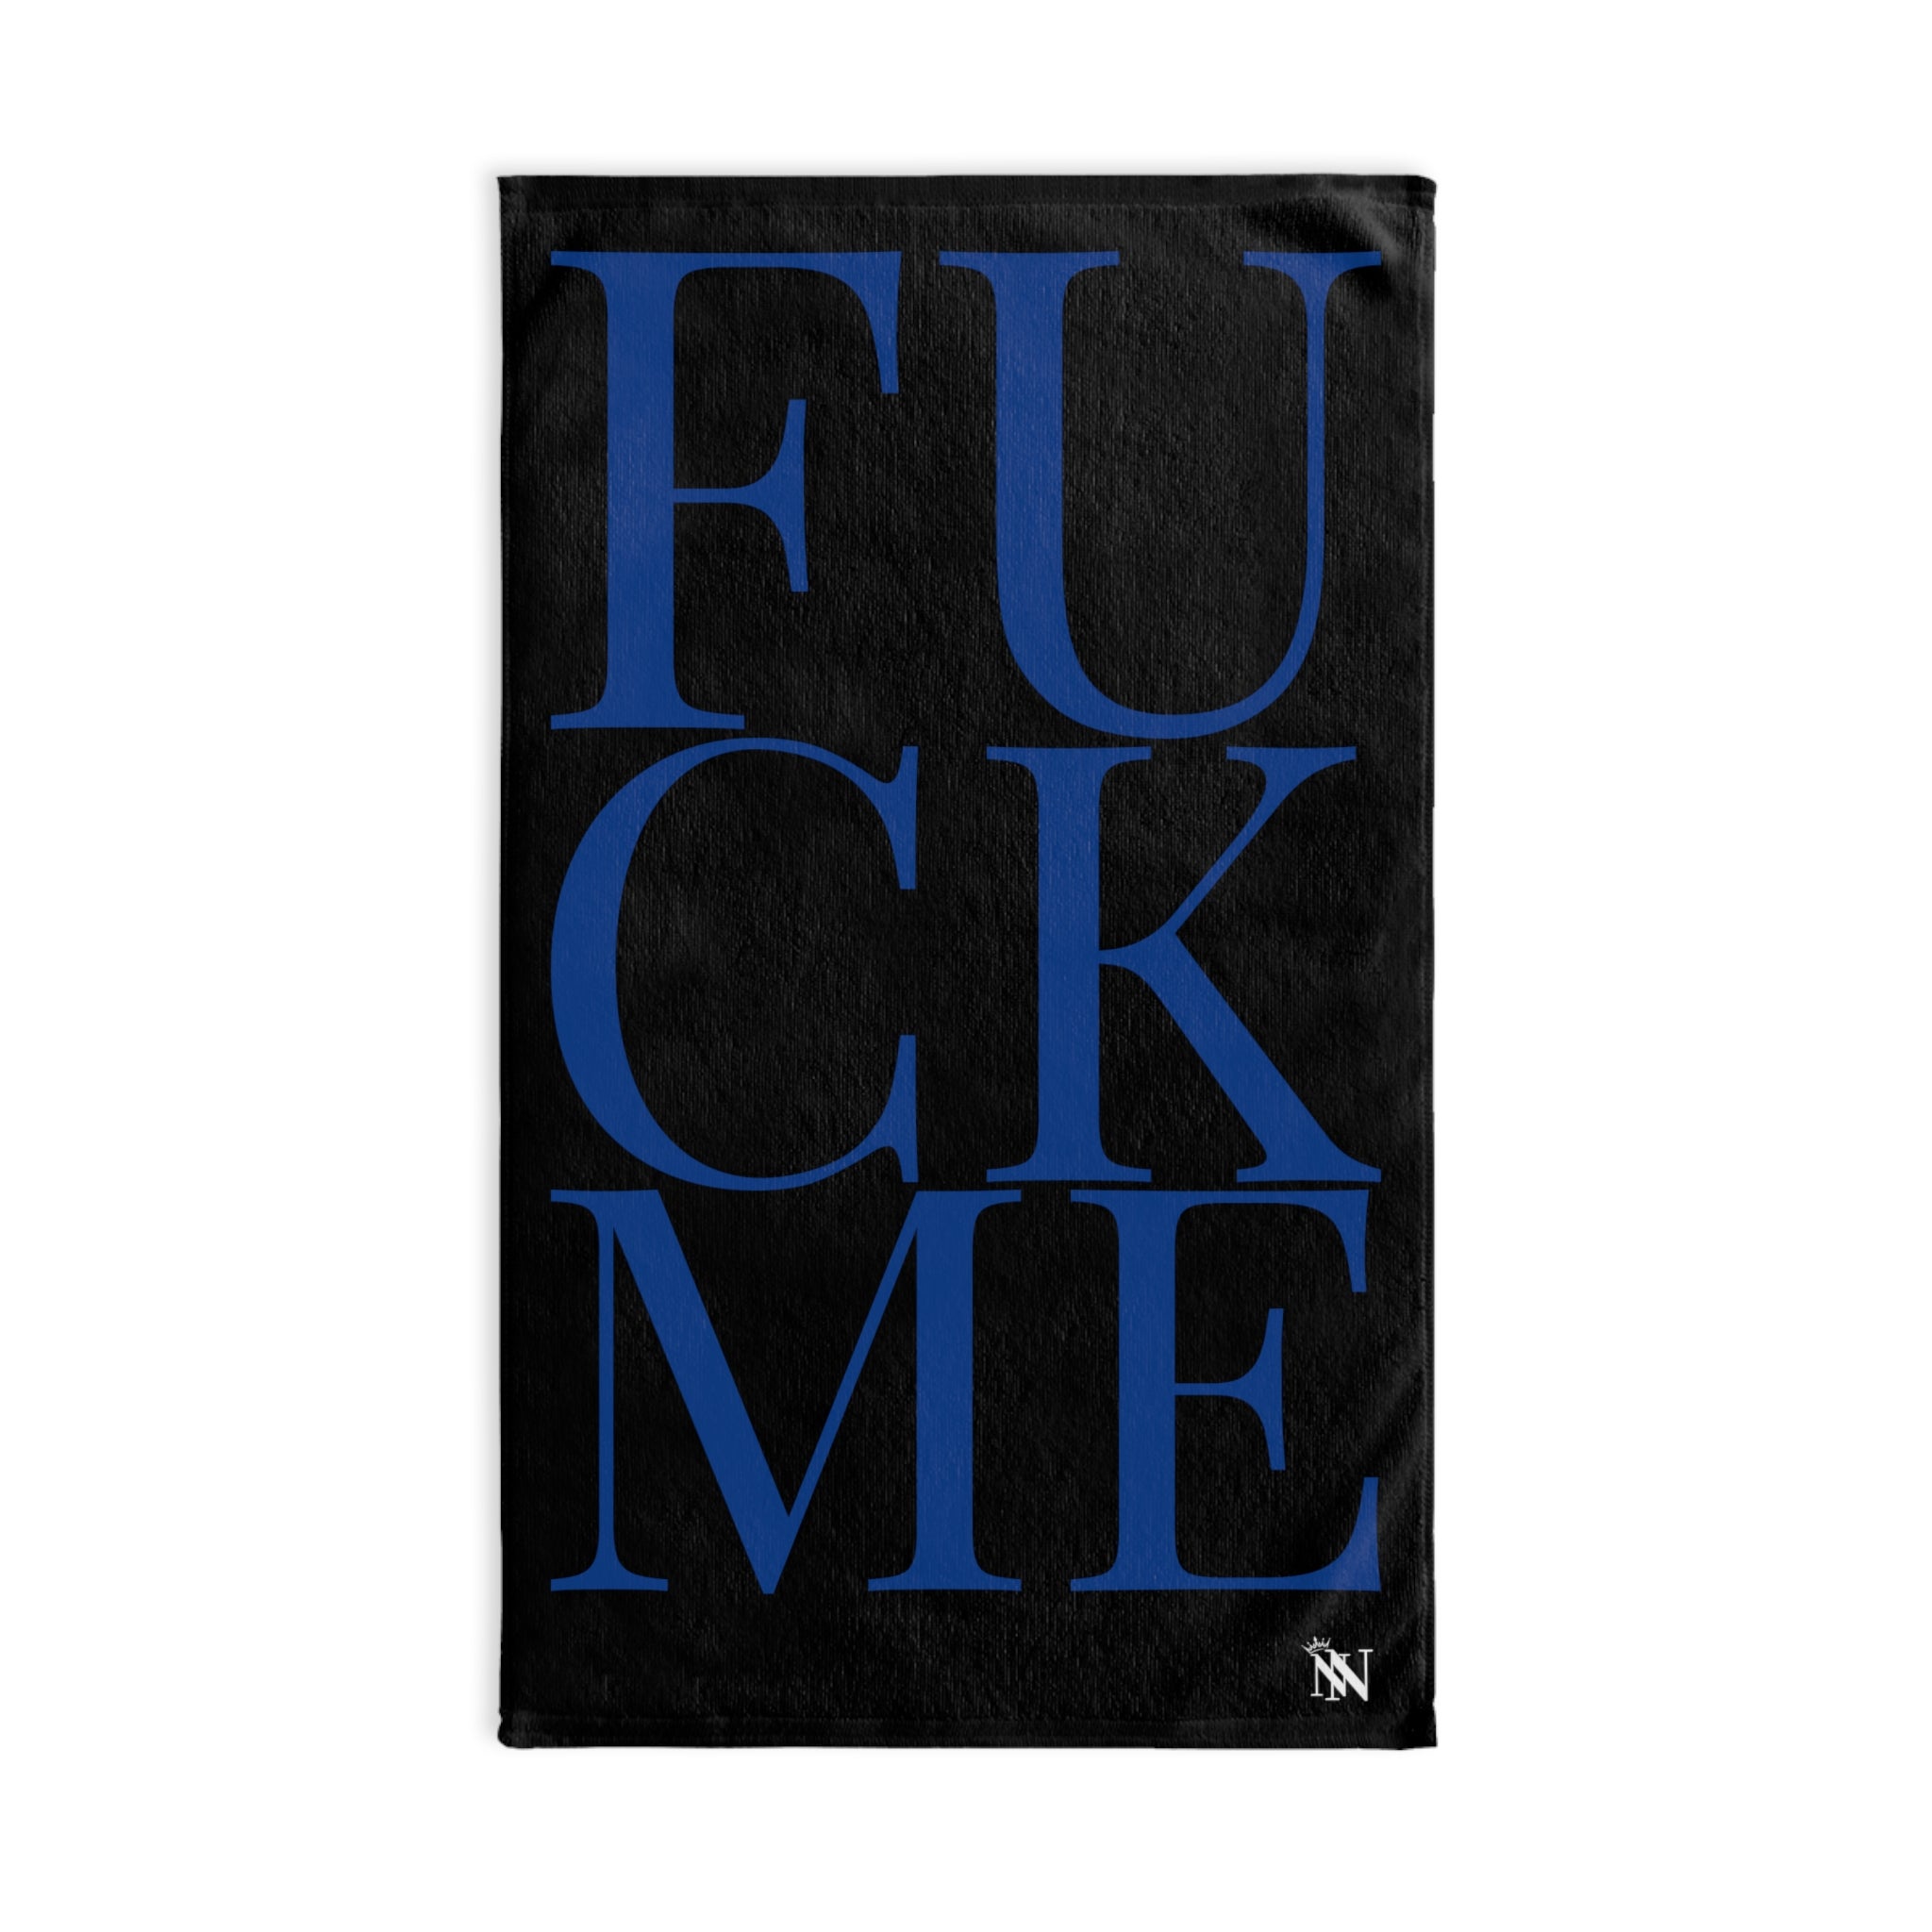 F*ck Me Letter Blue Black | Sexy Gifts for Boyfriend, Funny Towel Romantic Gift for Wedding Couple Fiance First Year 2nd Anniversary Valentines, Party Gag Gifts, Joke Humor Cloth for Husband Men BF NECTAR NAPKINS